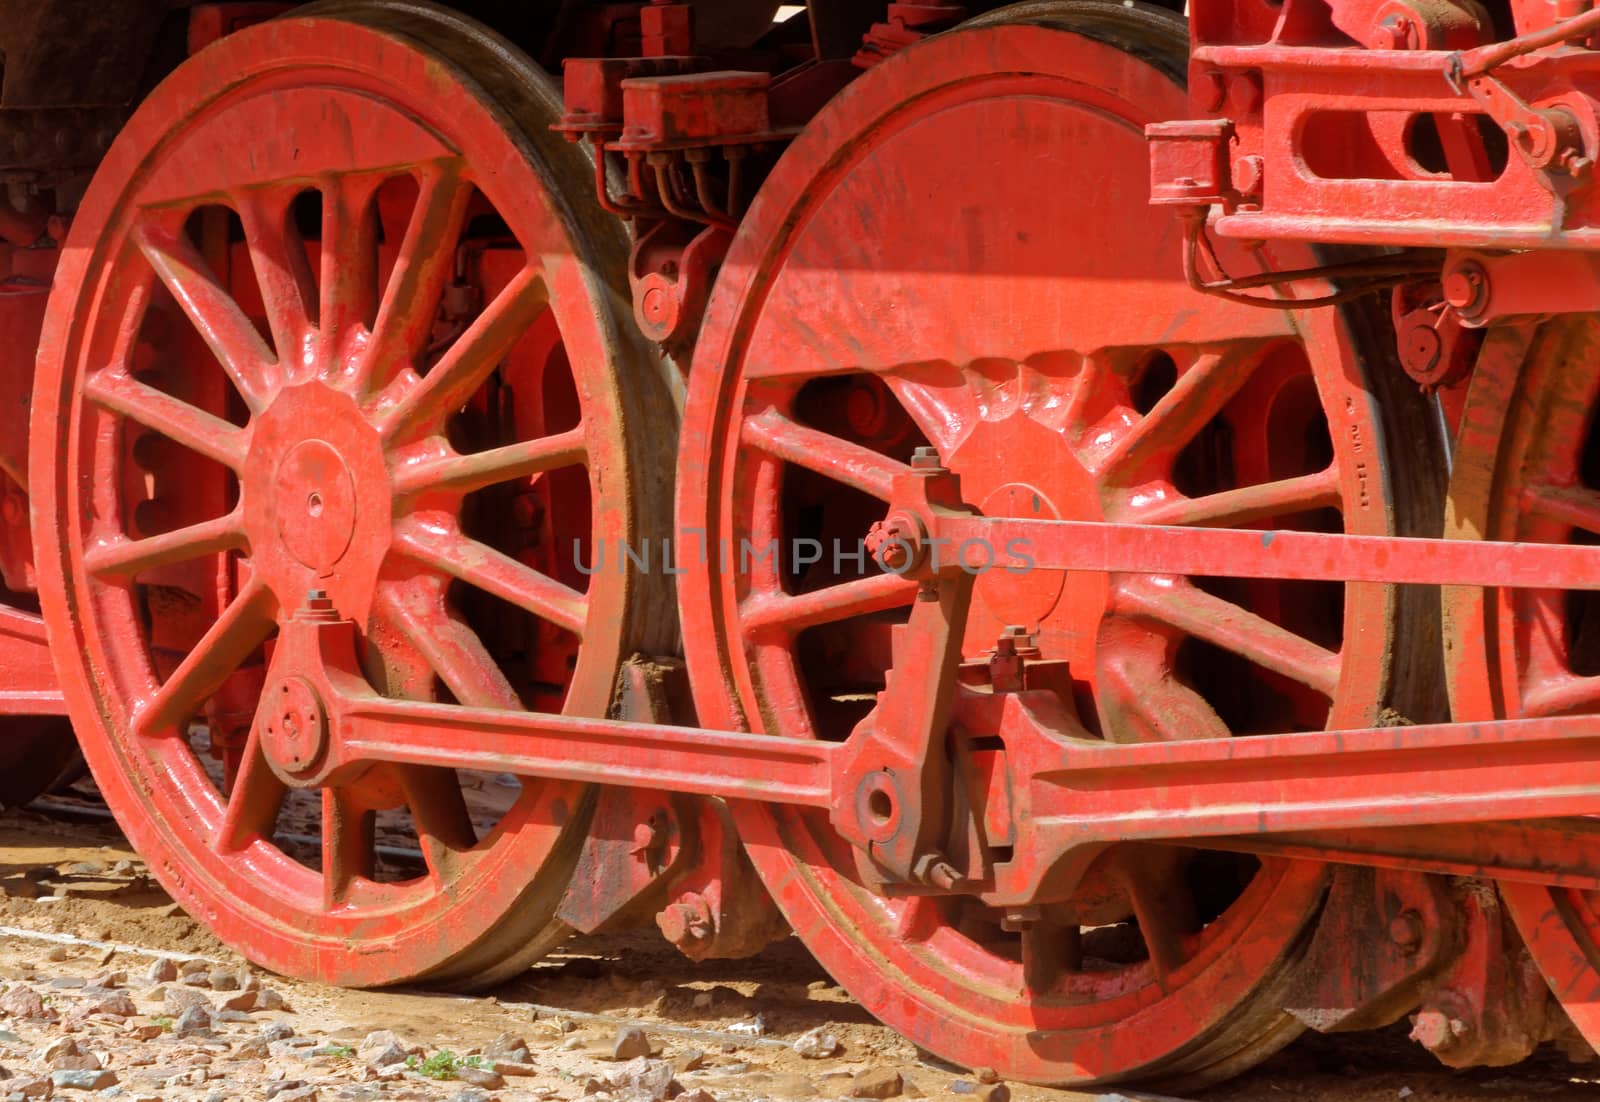 Detail of the steam locomotive, still in use, in the desert of Wadi Rum by geogif